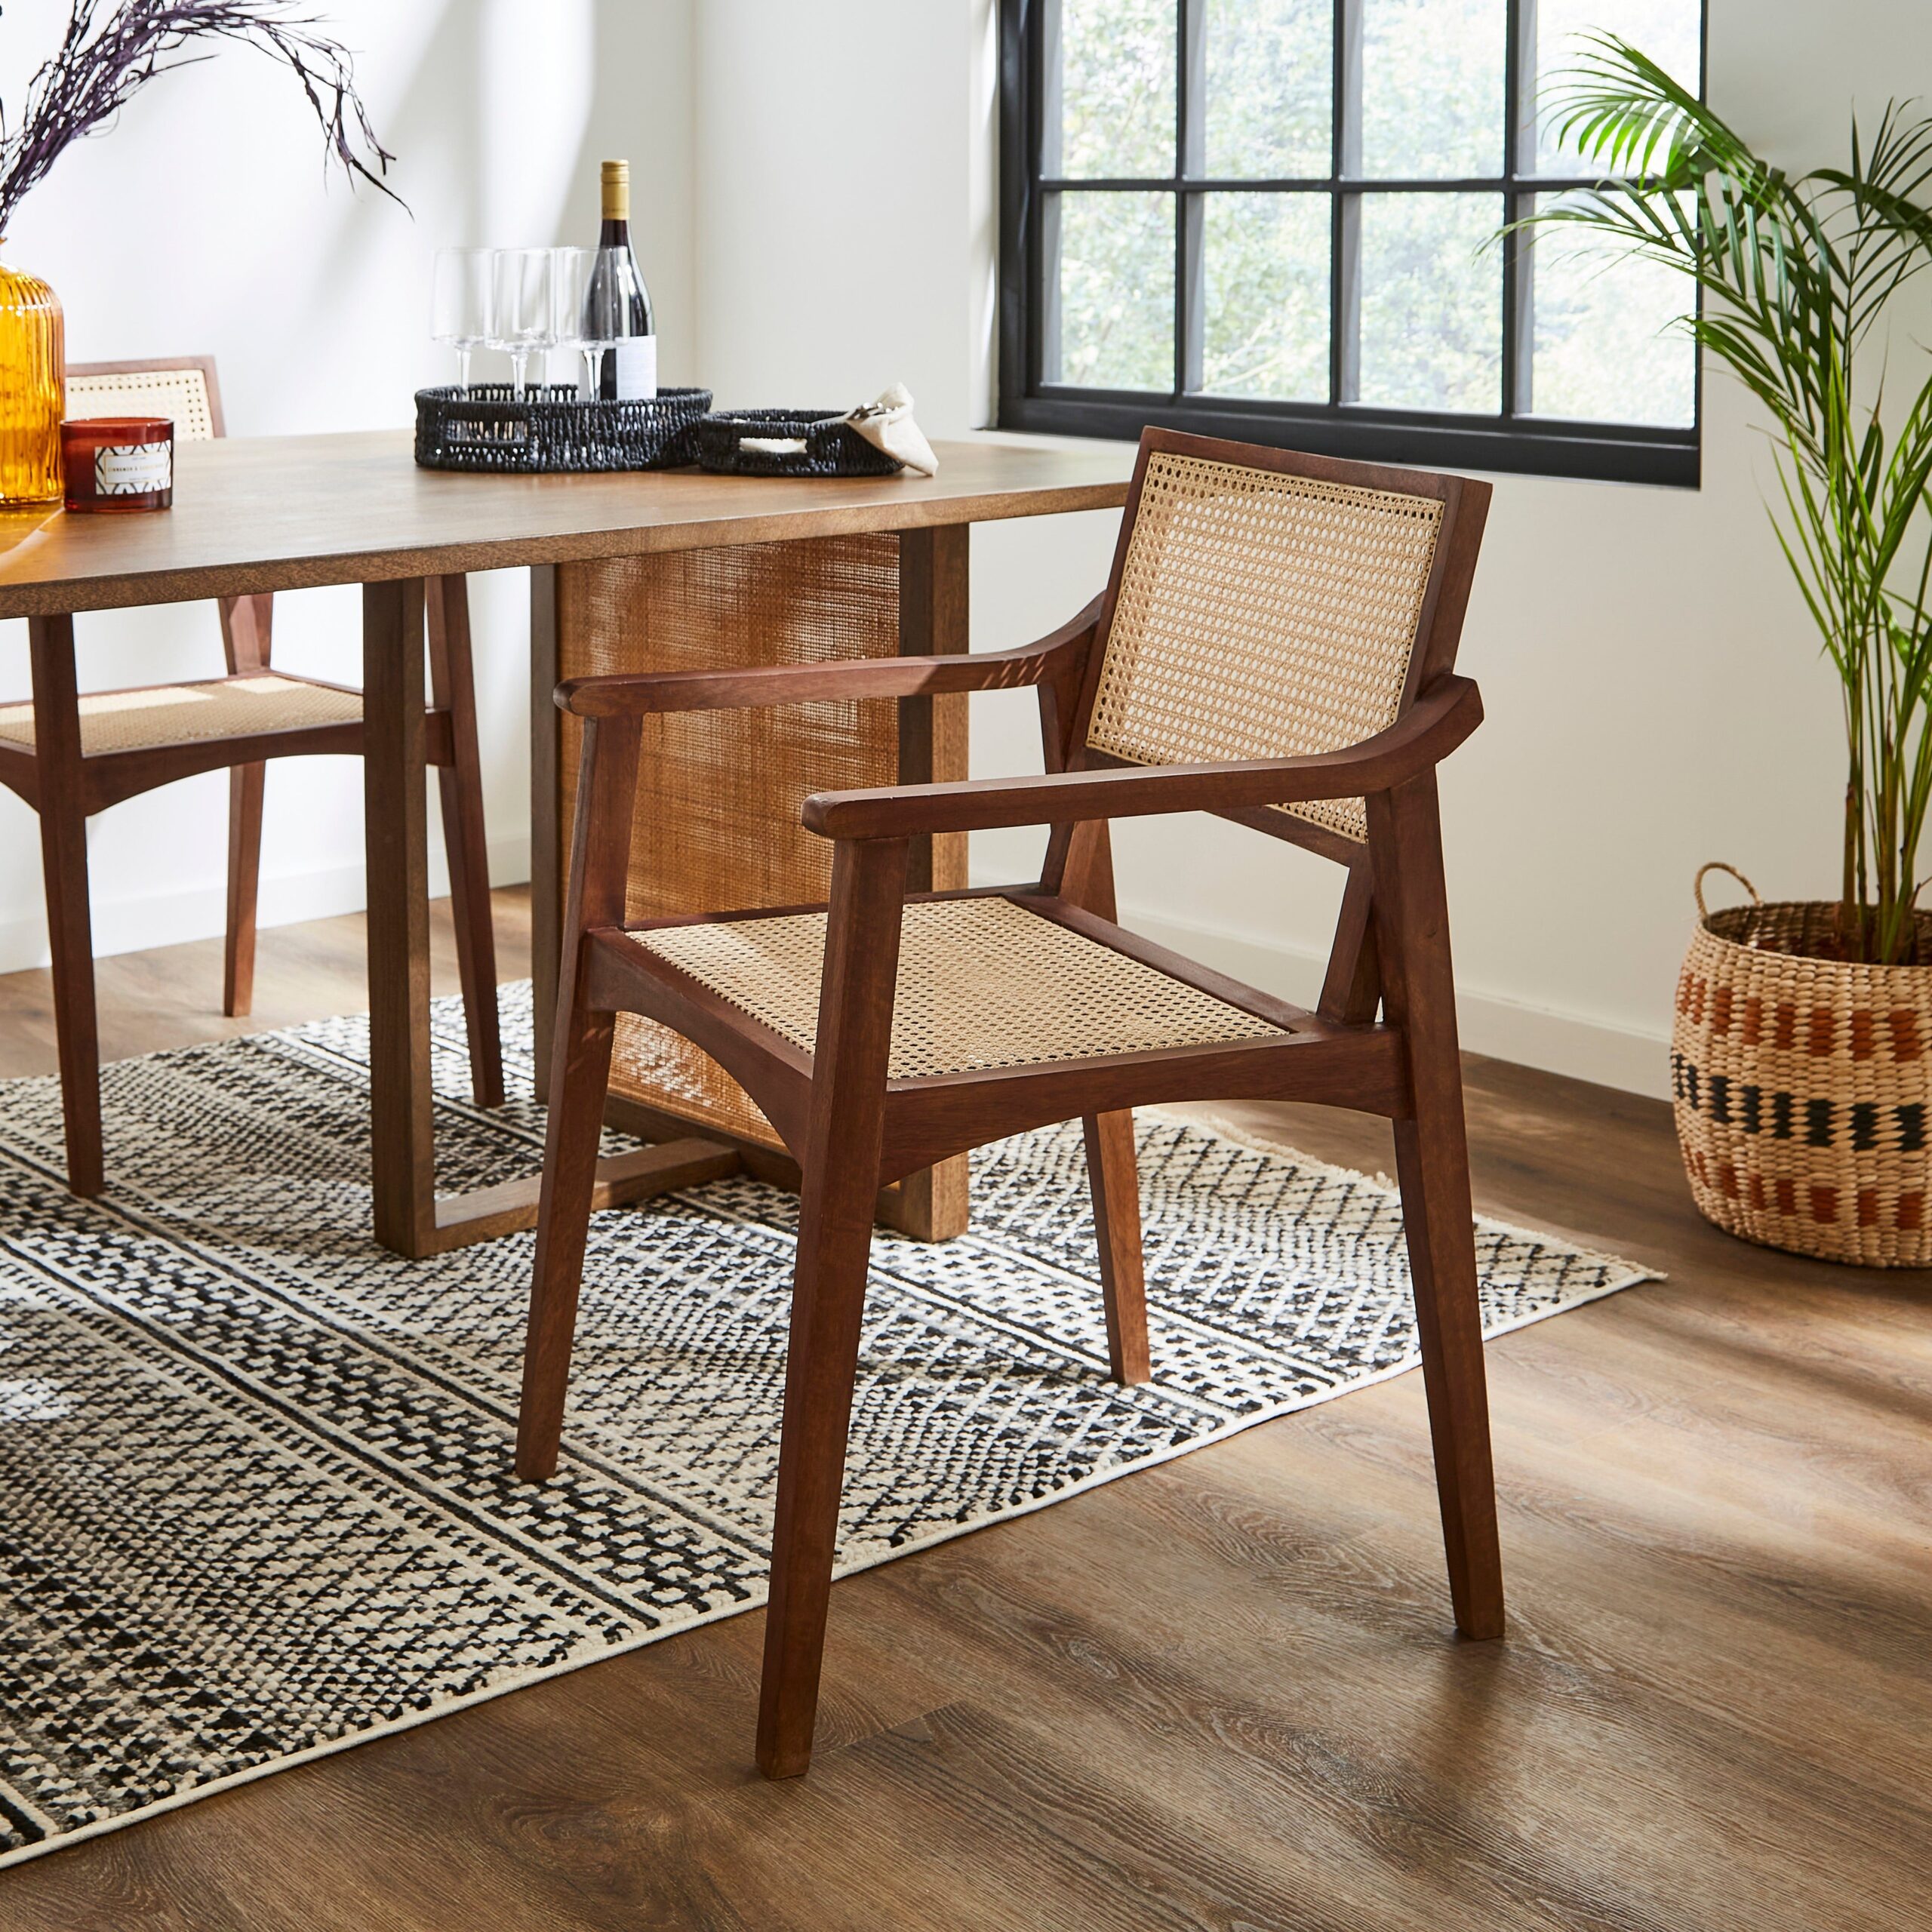 The Charm of Wooden Dining Table and Chairs